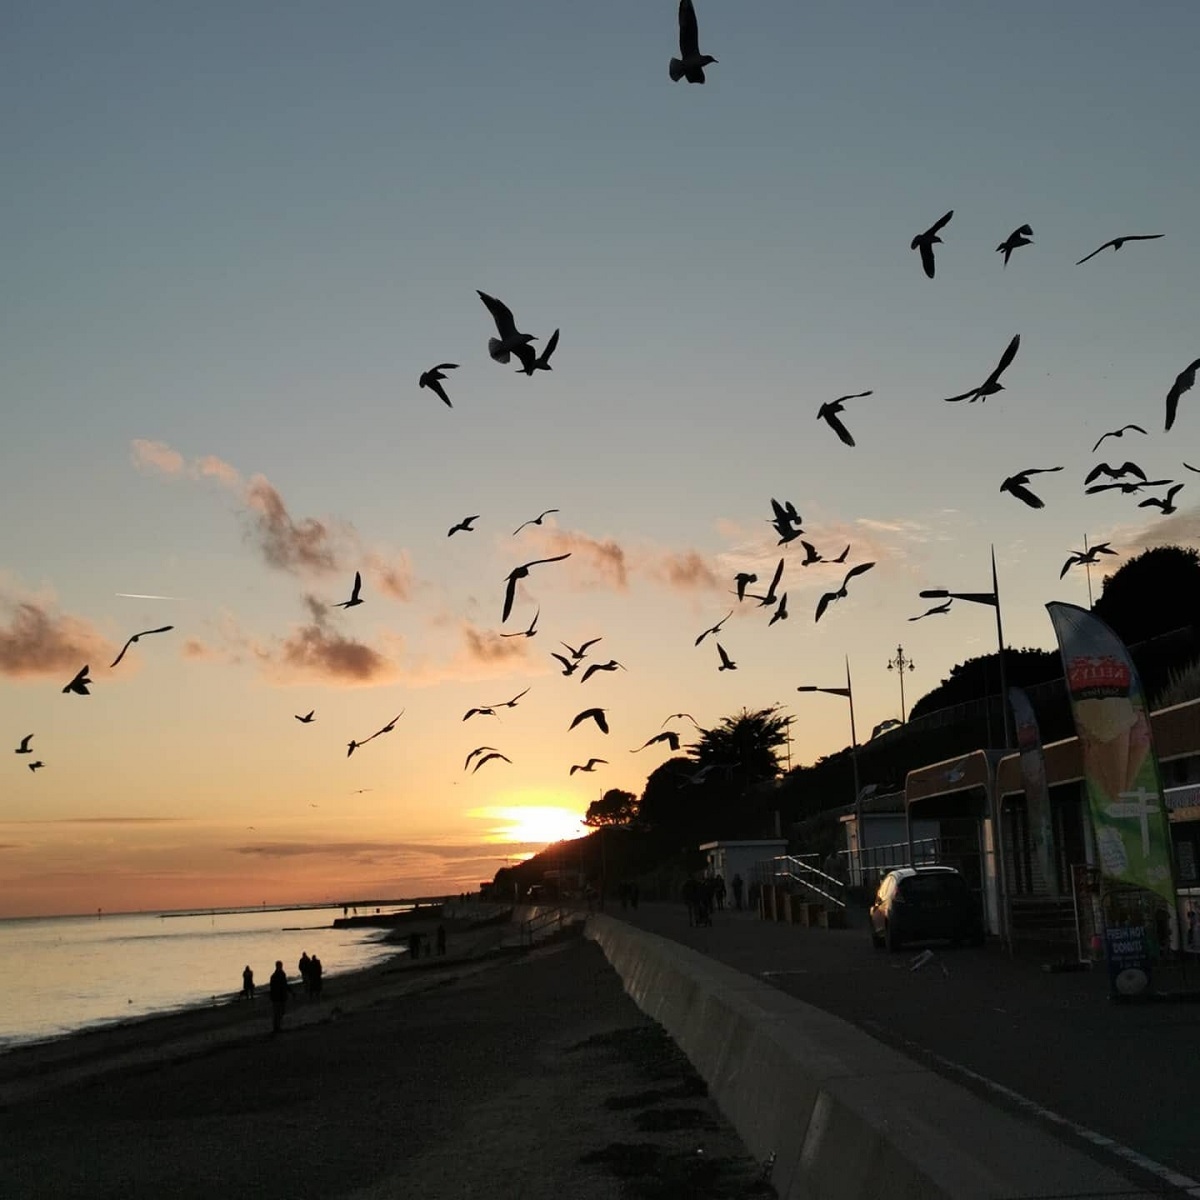 Fly by night - Tracy Boss Clarke captured these gulls dominating the Clacton skyline